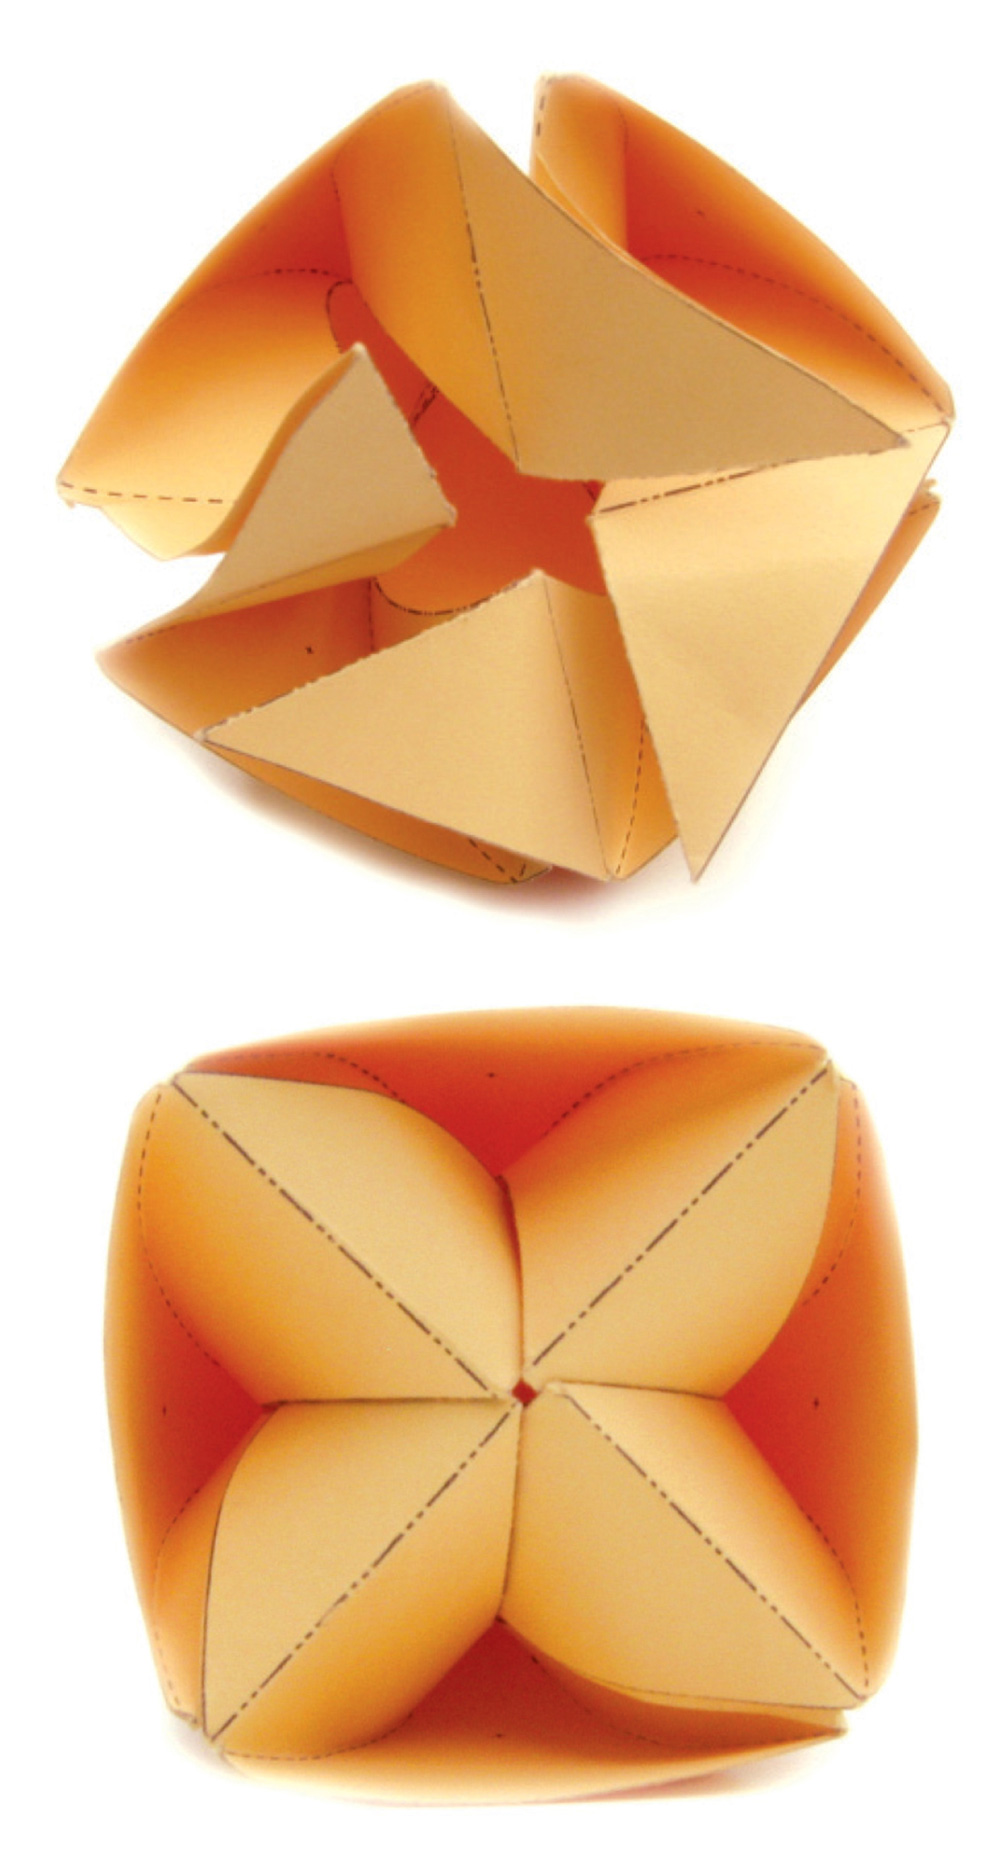 A photograph showing two steps of the folding process to make an origami bud.